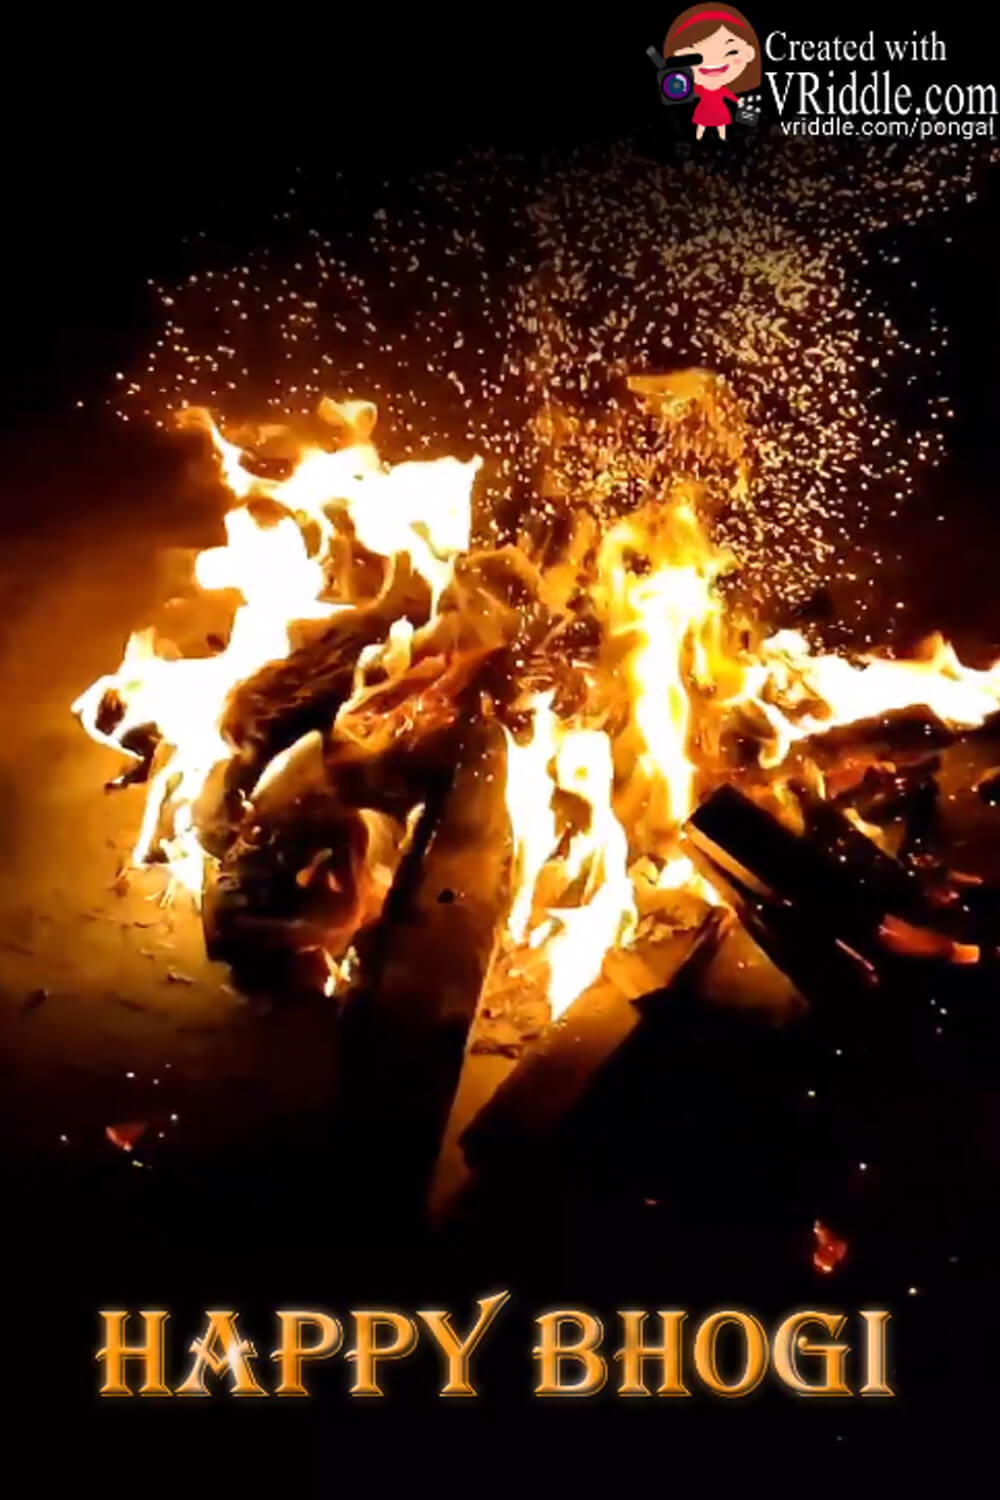 Happy Bhogi Fire Animated Greetings Video – VRiddle